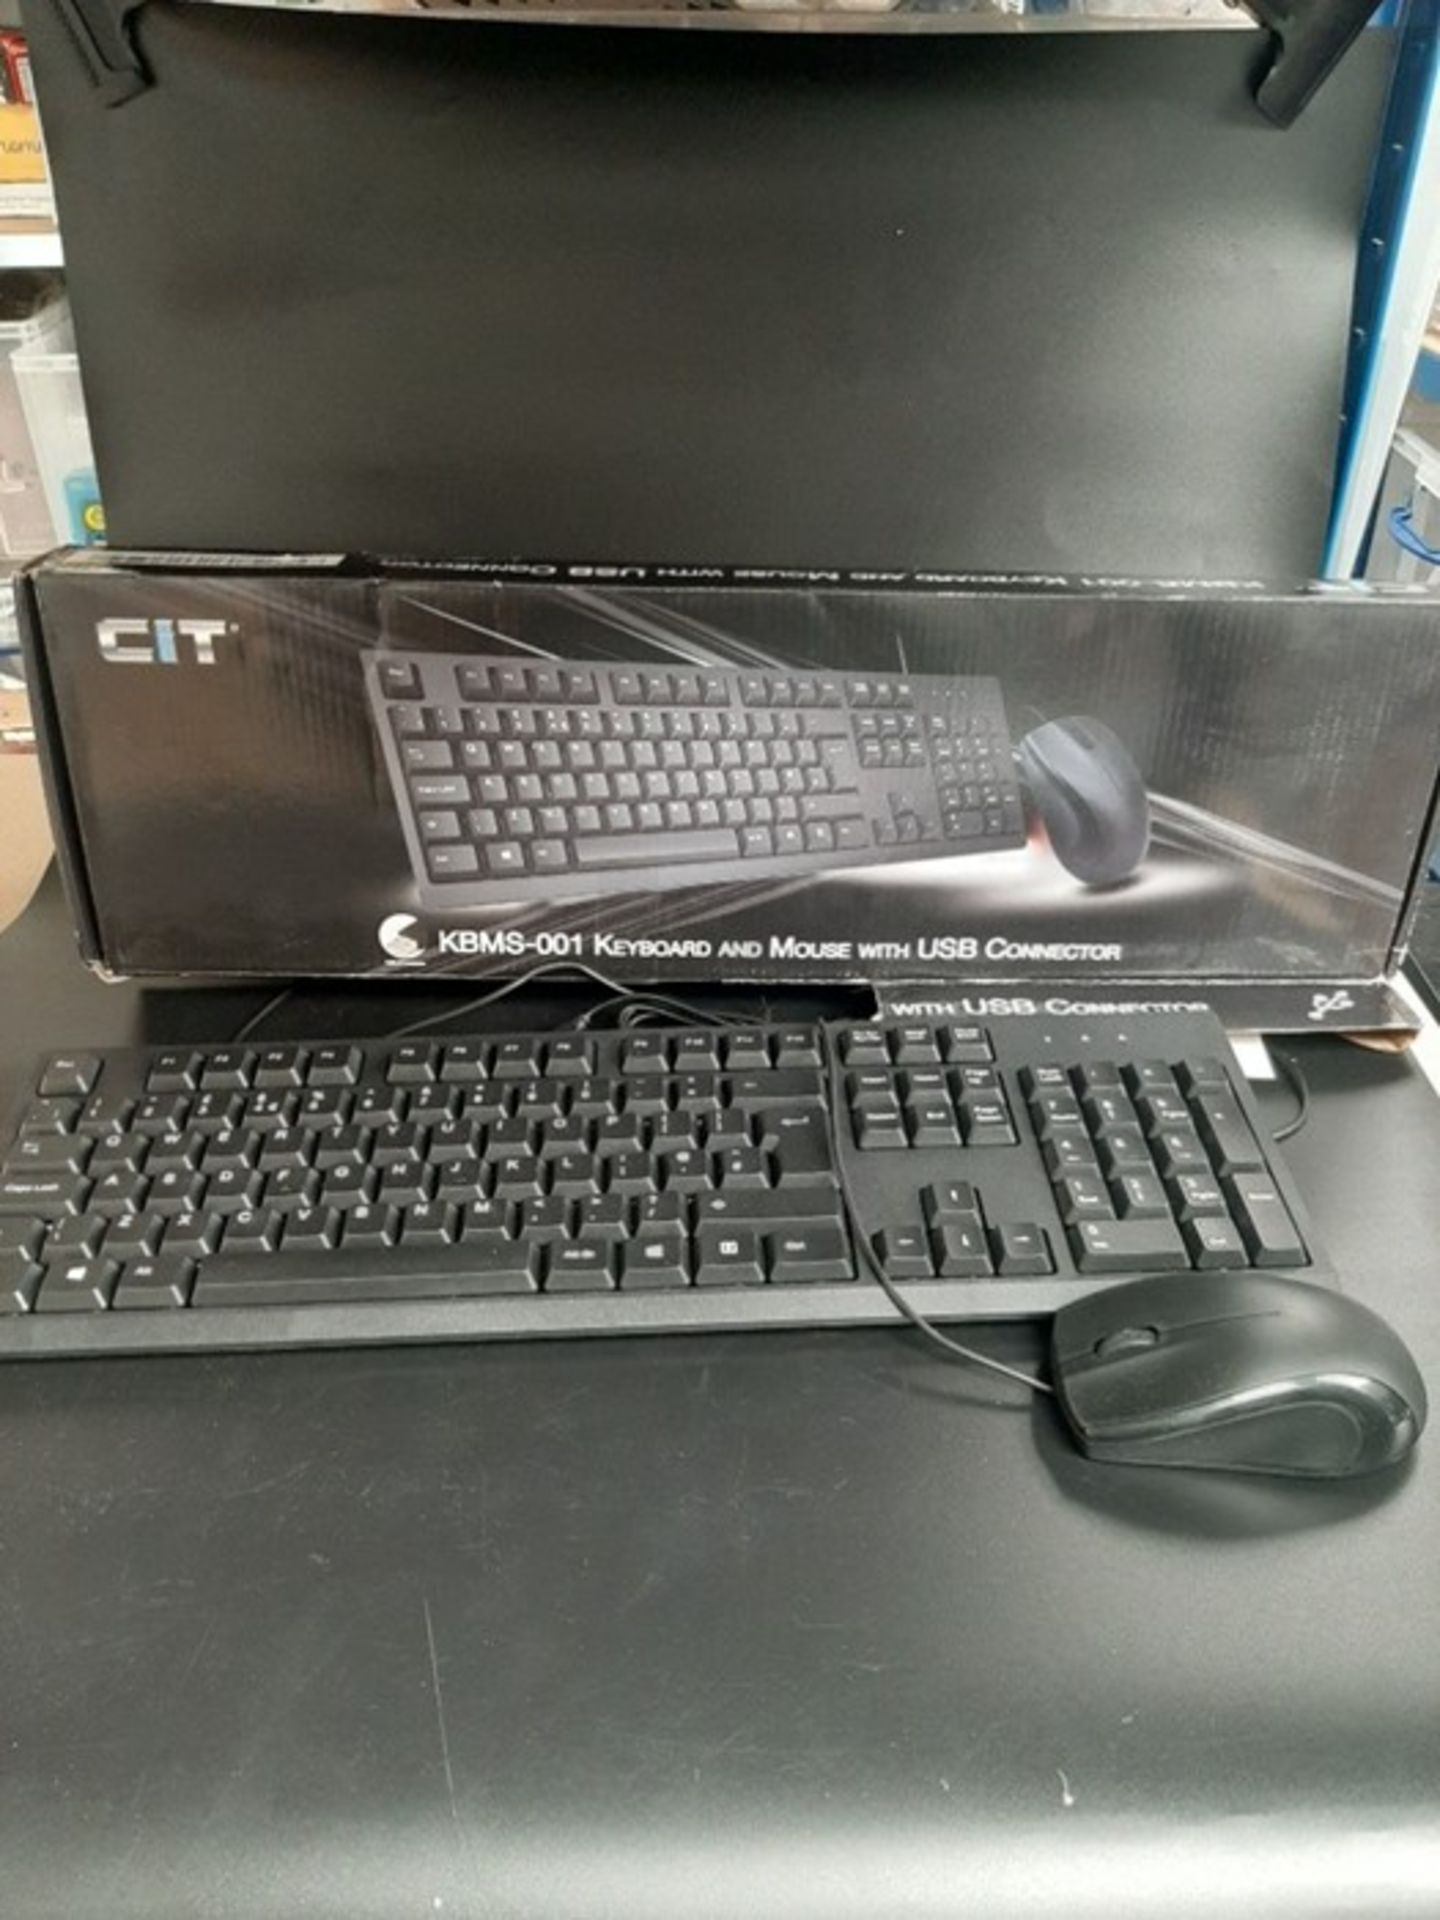 CiT USB Keyboard and Mouse Combo - Black - Image 2 of 2